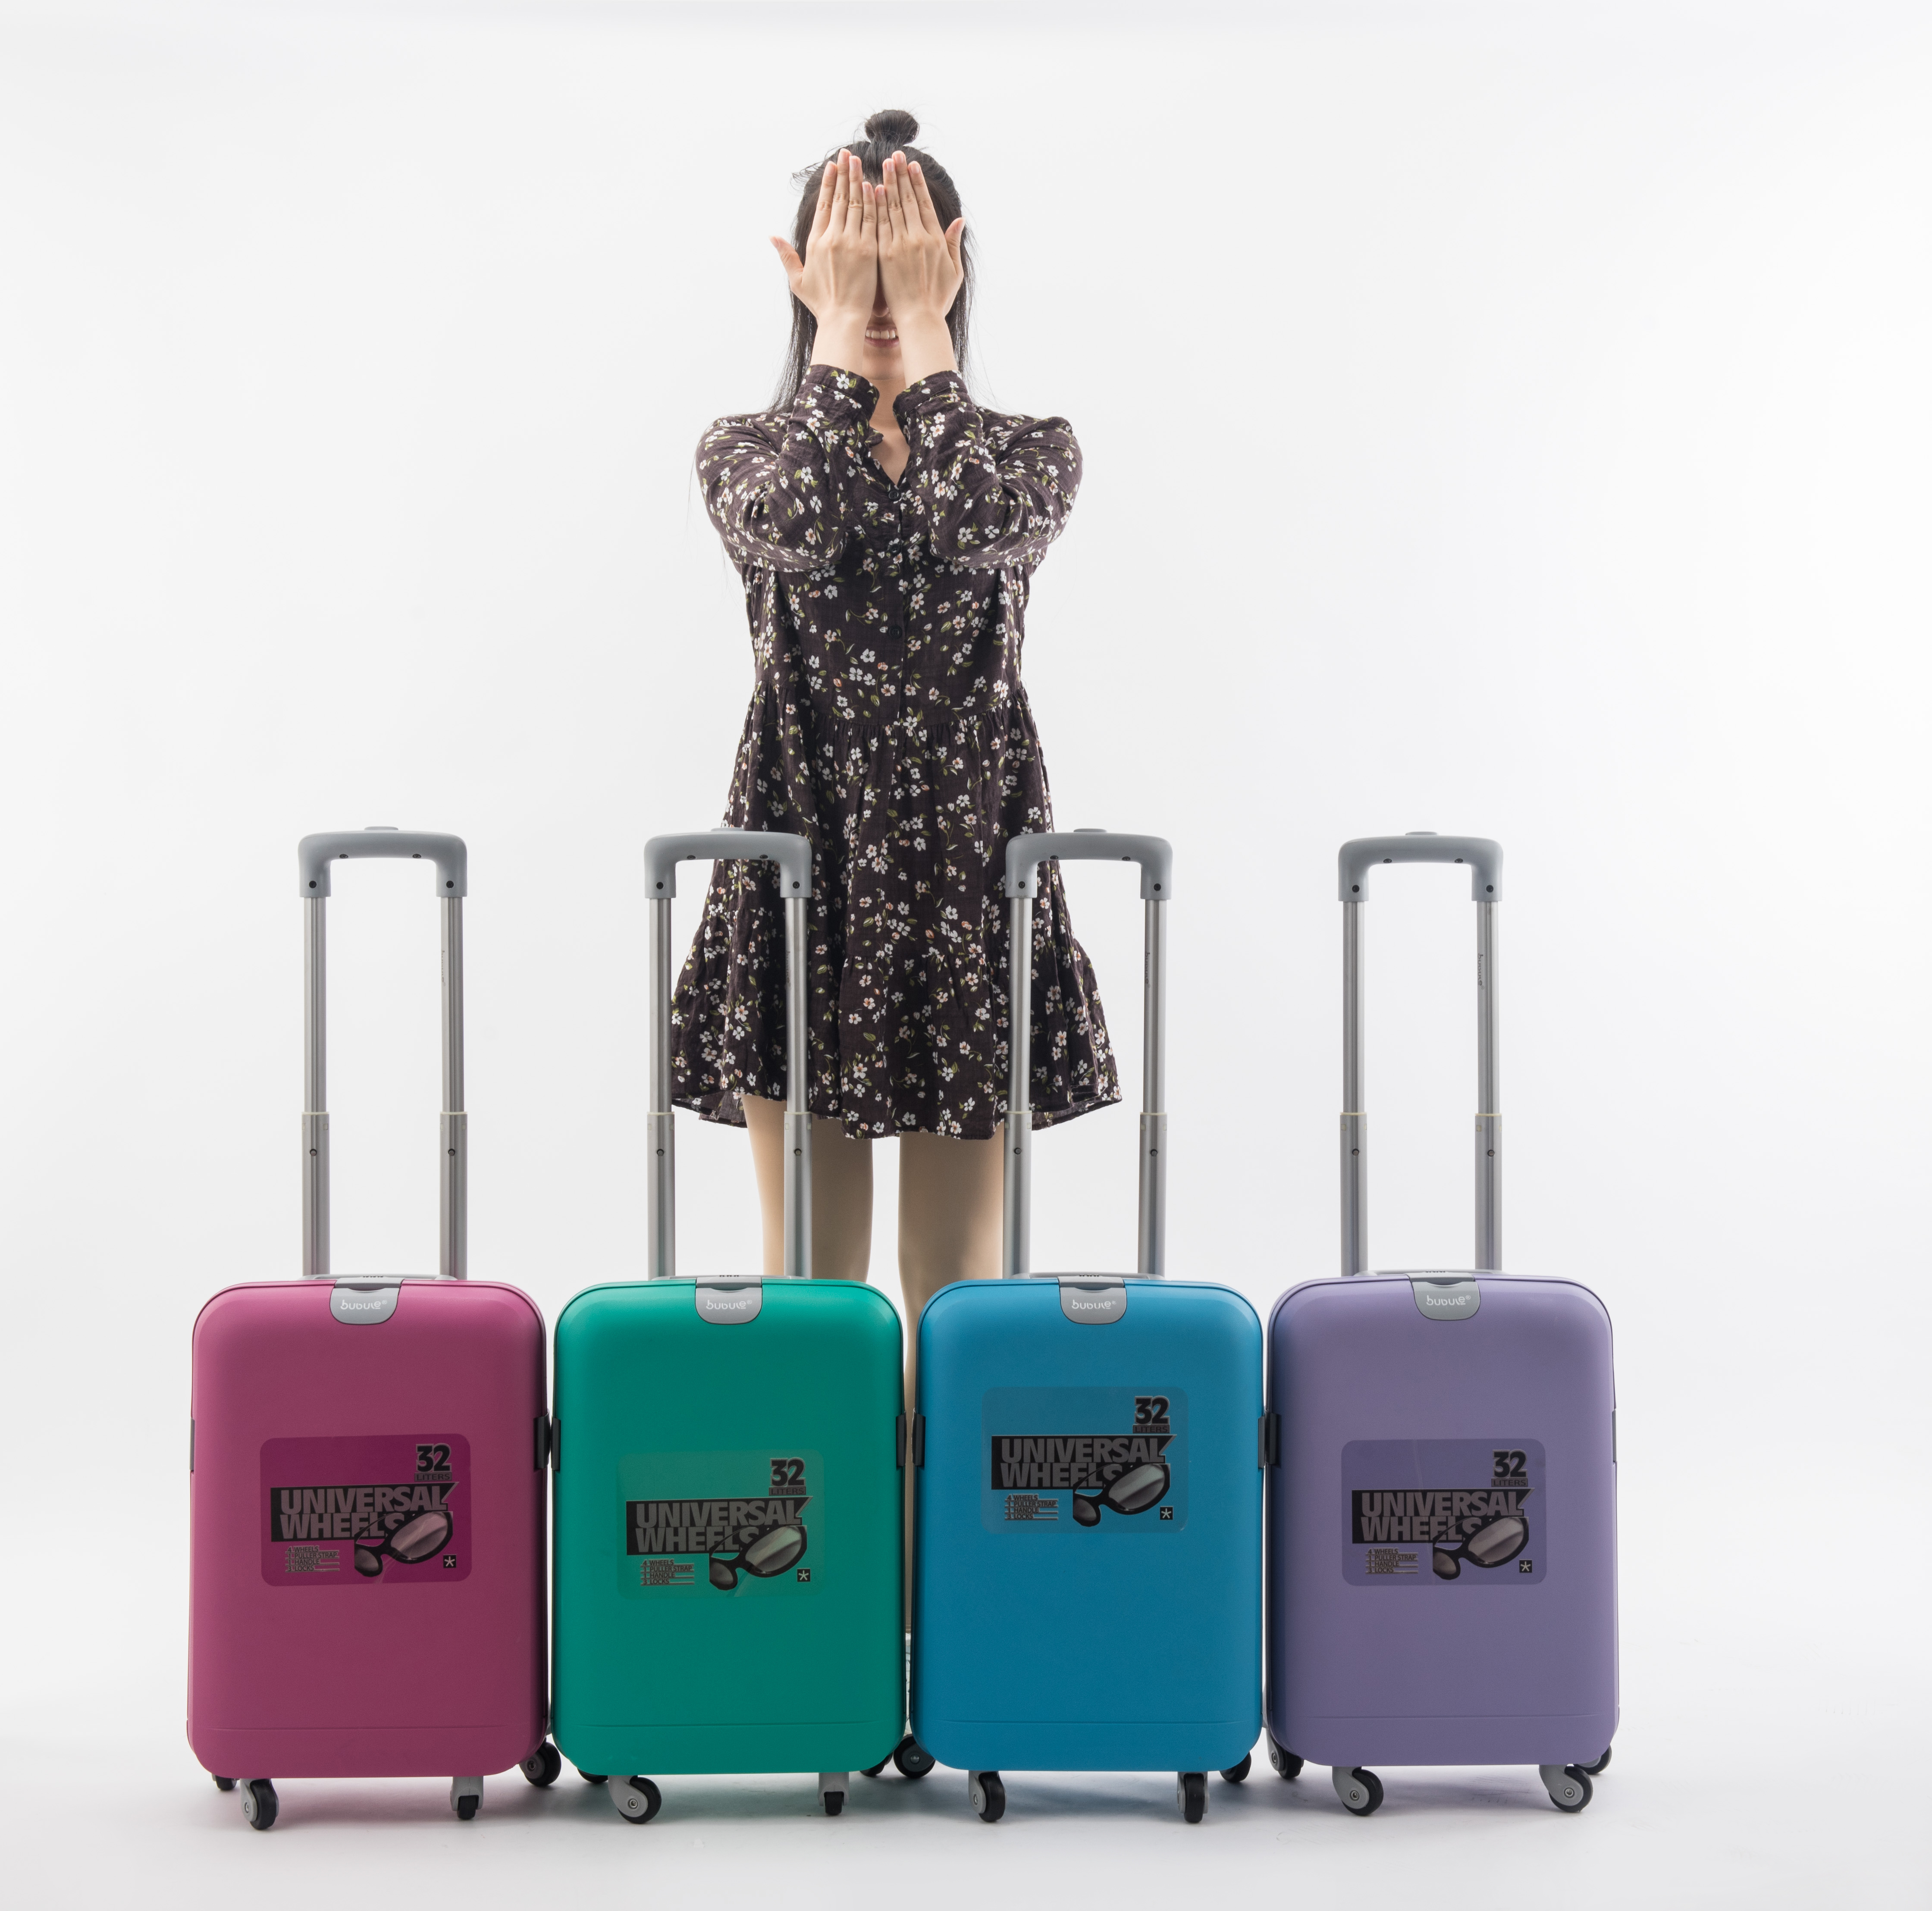 Fashion|2020 summer luggage bags popular colors